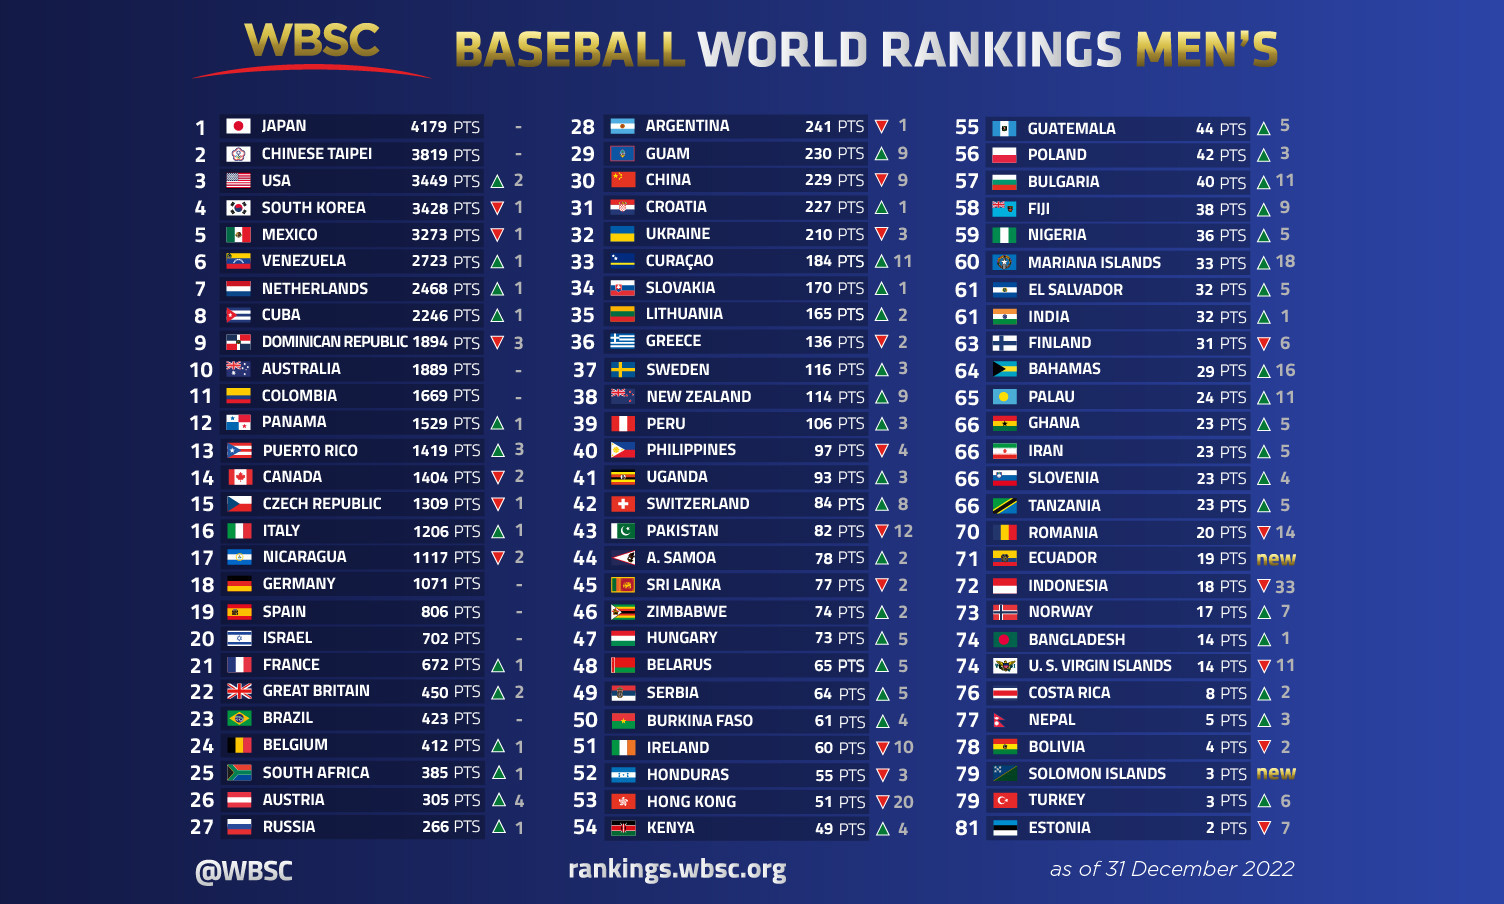 Japan sit top of the men's end-of-year baseball world rankings, released today by the WBSC ©WBSC